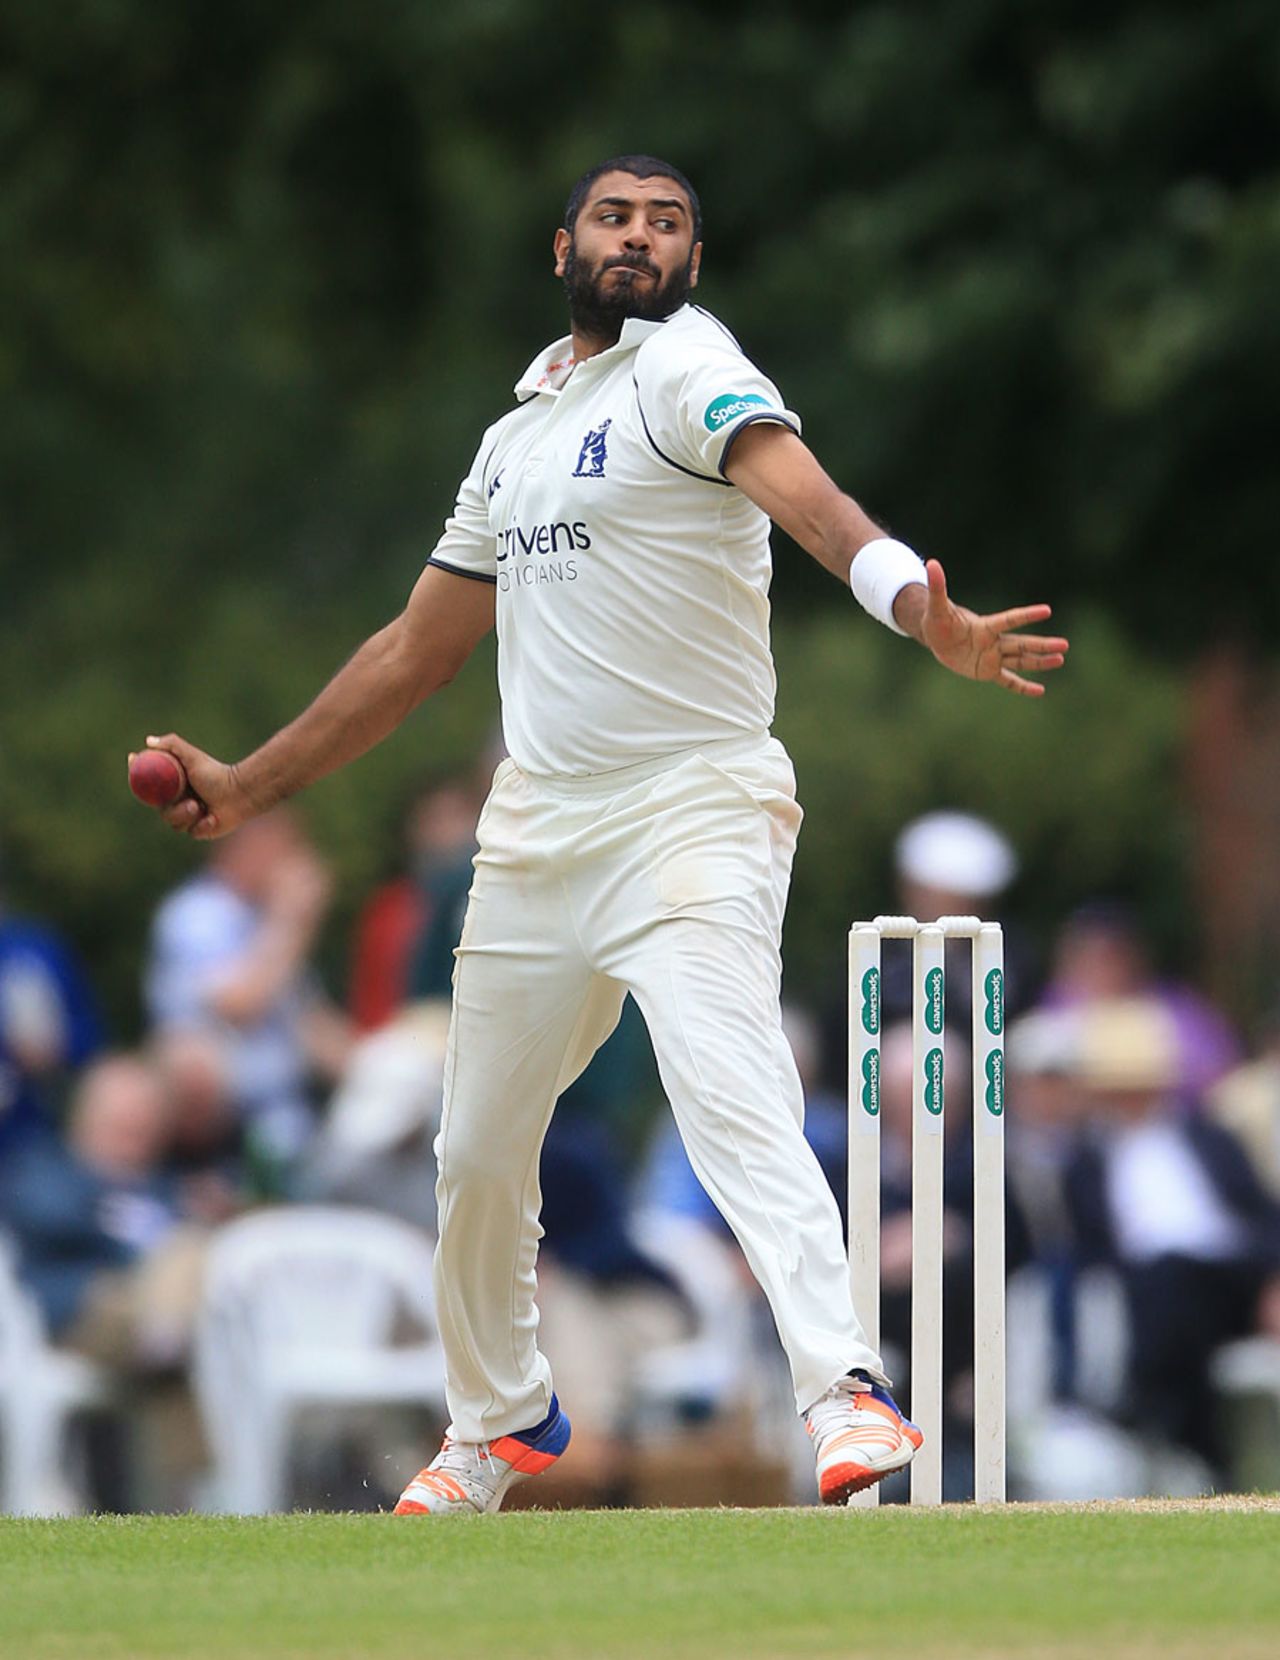 Jeetan Patel took a ten-wicket match haul to rout Surrey, Surrey v Warwickshire, County Championship, Division One, Guildford, 3rd day, July 4, 2016